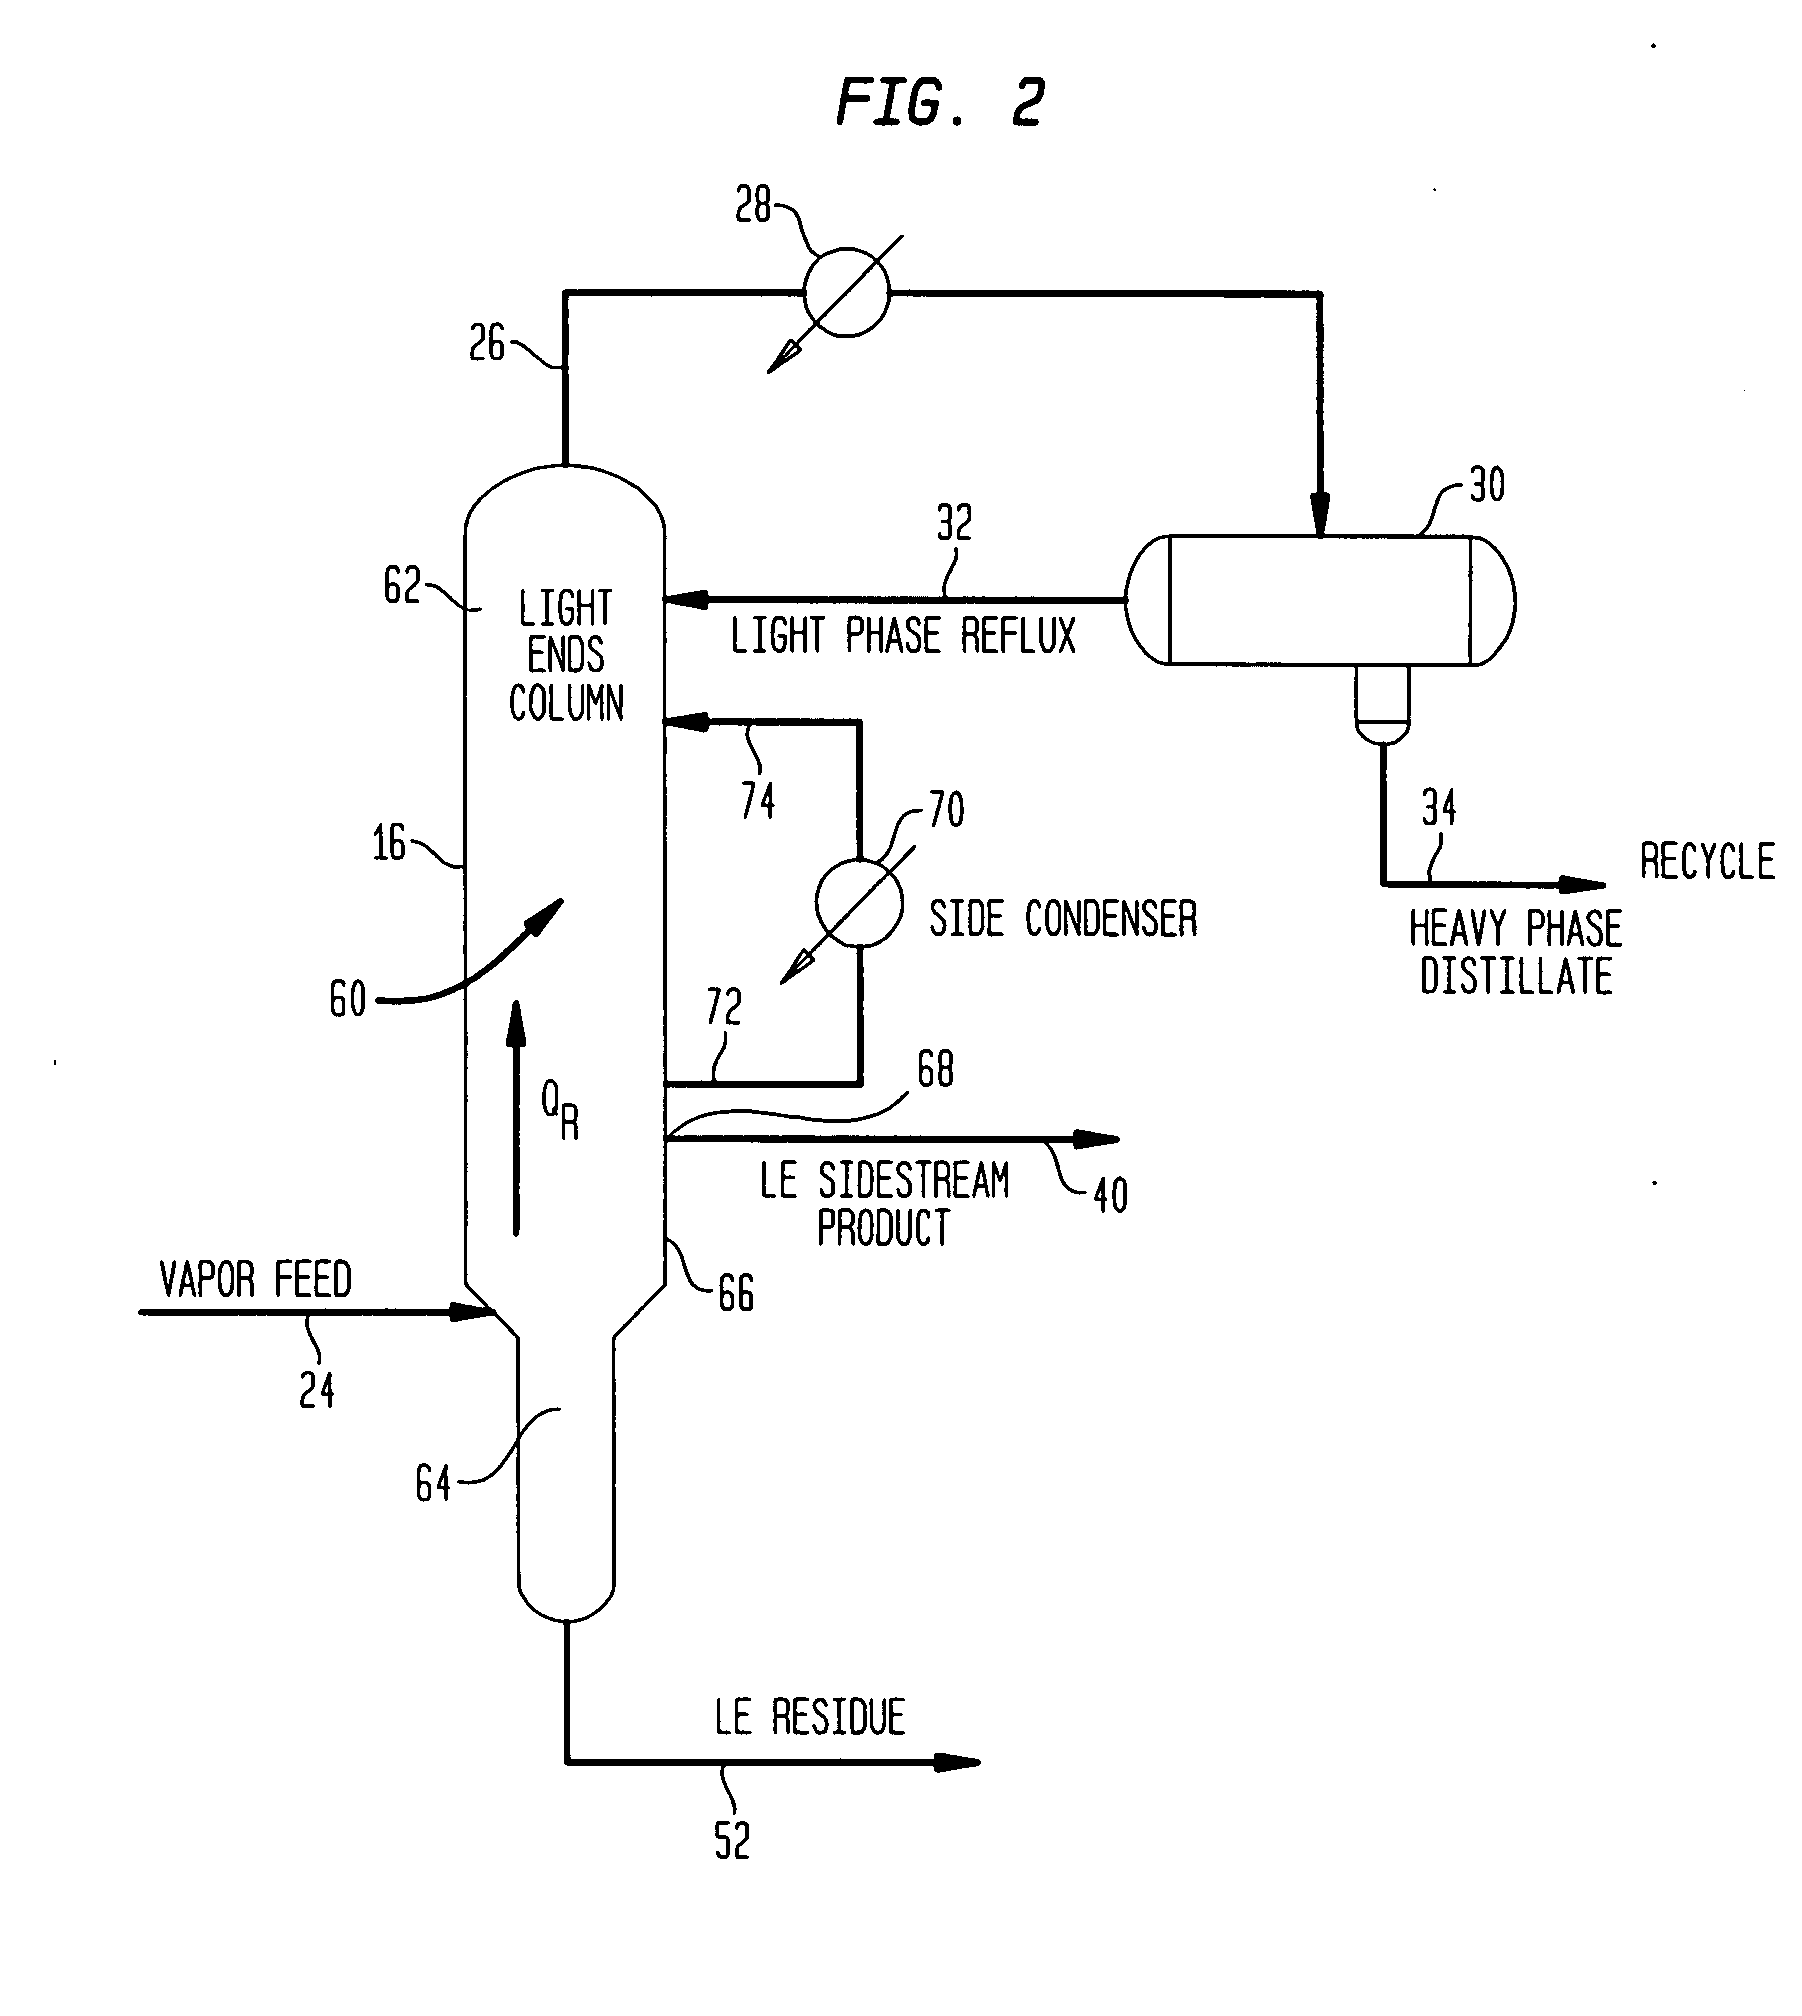 Method and apparatus for making acetic acid with improved light ends column productivity